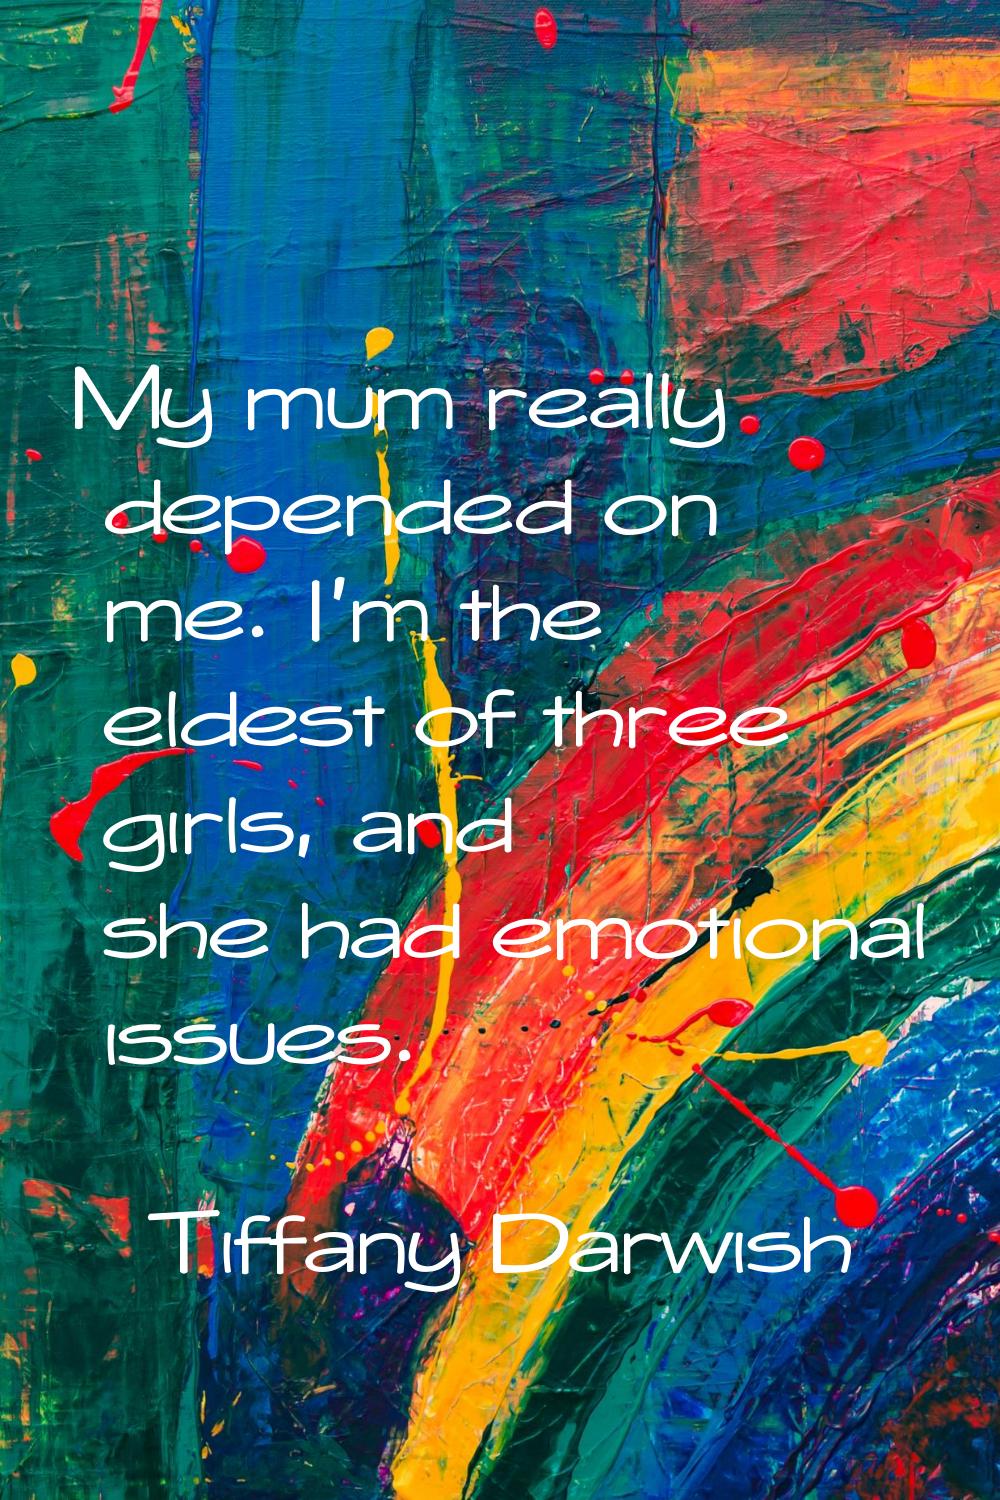 My mum really depended on me. I'm the eldest of three girls, and she had emotional issues.